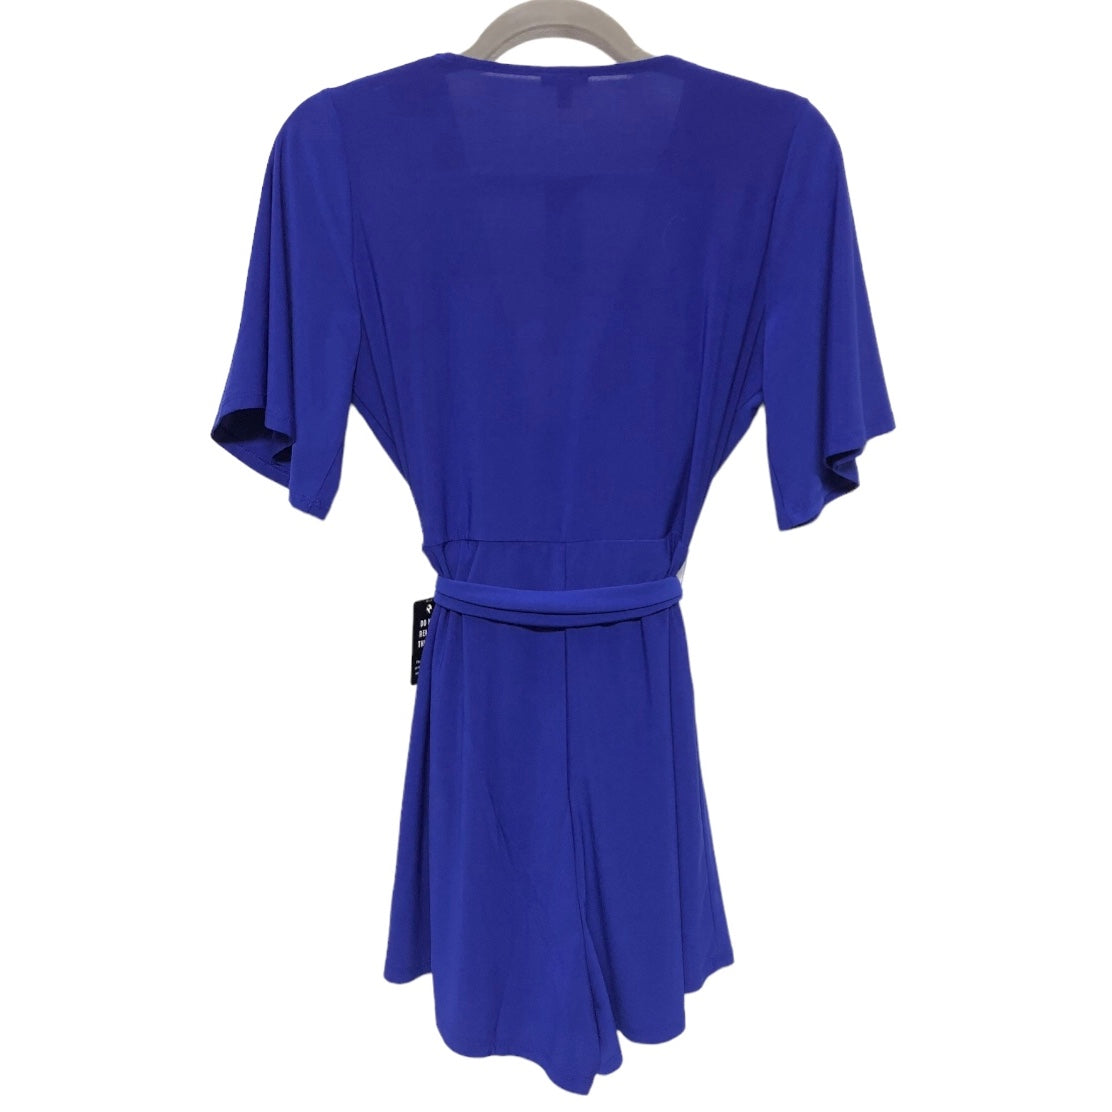 Romper By Express  Size: Xs